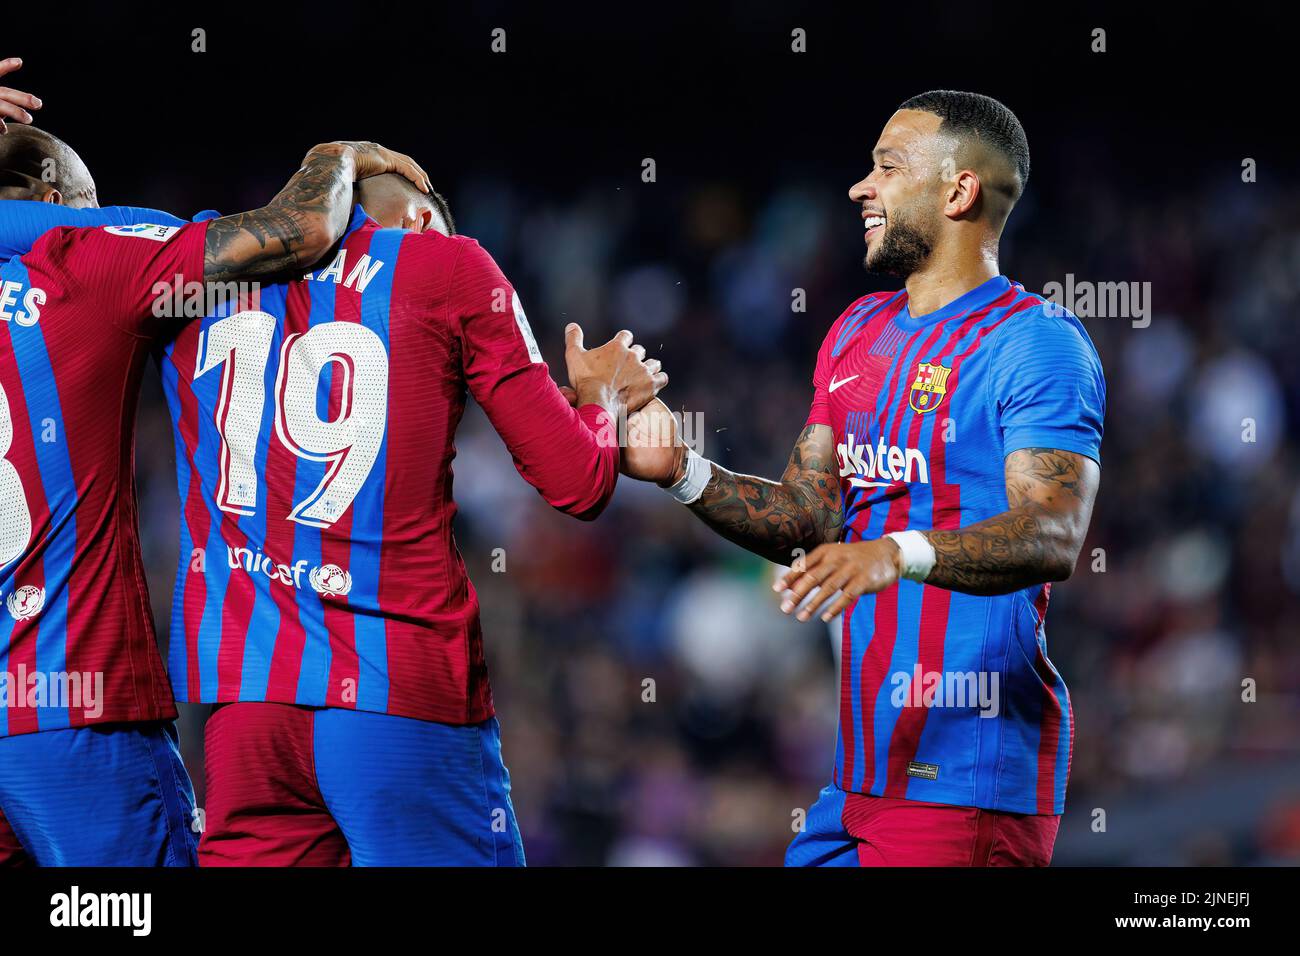 BARCELONA - MAY 1: Barcelona players celebrate after scoring a goal at the La Liga match between FC Barcelona and RCD Mallorca at the Camp Nou Stadium Stock Photo